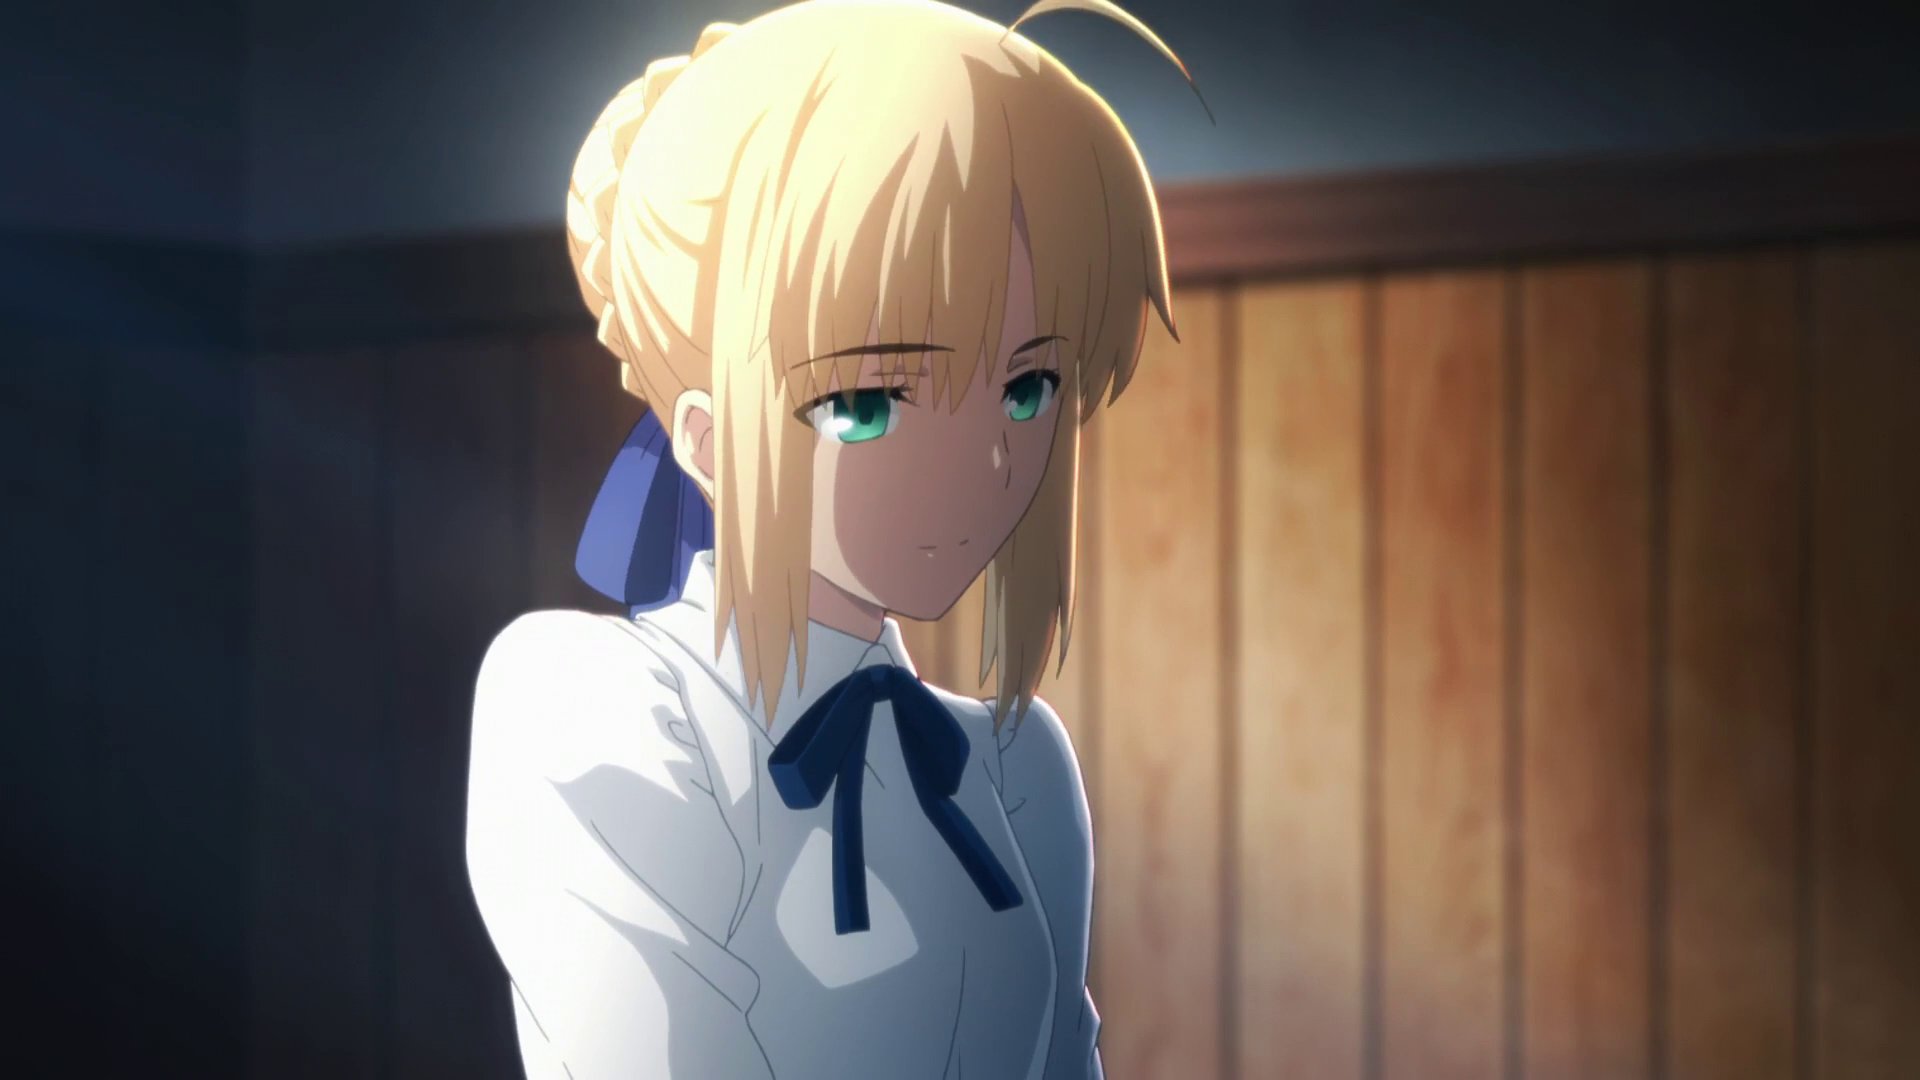 Anime 1920x1080 anime Anime screenshot anime girls Fate/Stay Night: Unlimited Blade Works Fate/Stay Night Fate series Fate/Grand Order blonde Saber Artoria Pendragon